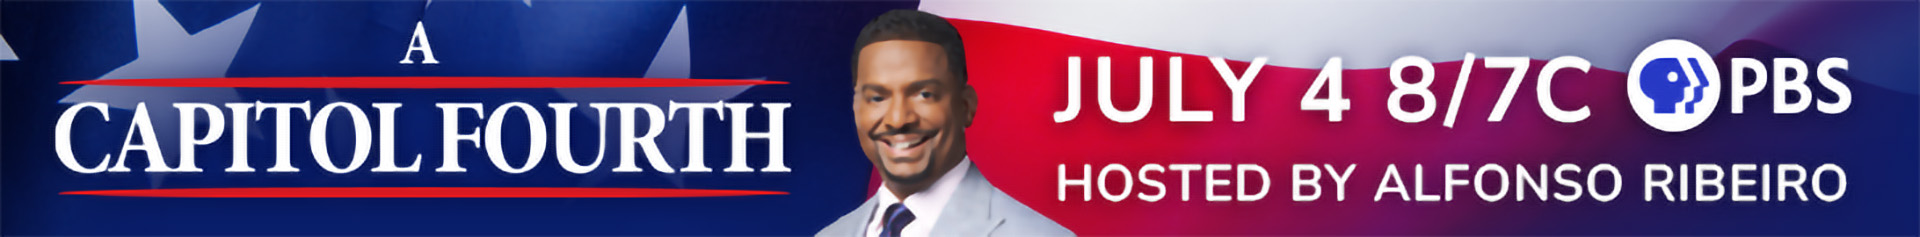 PBS Special: A Capitol Fourth hosted by Alfonso Ribeiro